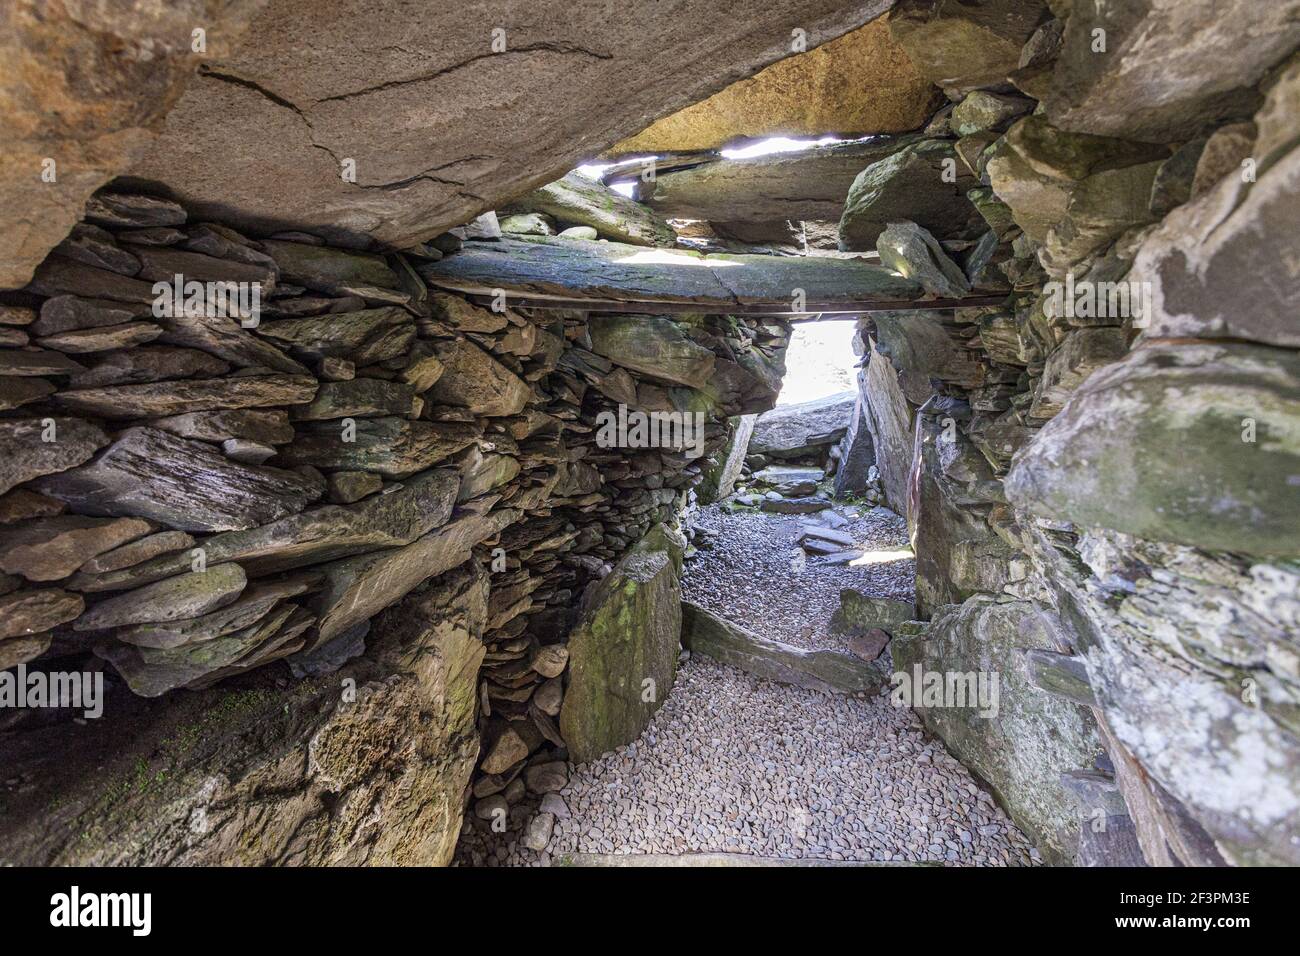 The interior of Nether Largie South Cairn, one of several Neolithic/Bronze Age chambered cairns in Kilmartin Glen, Argyll & Bute, Scotland UK Stock Photo